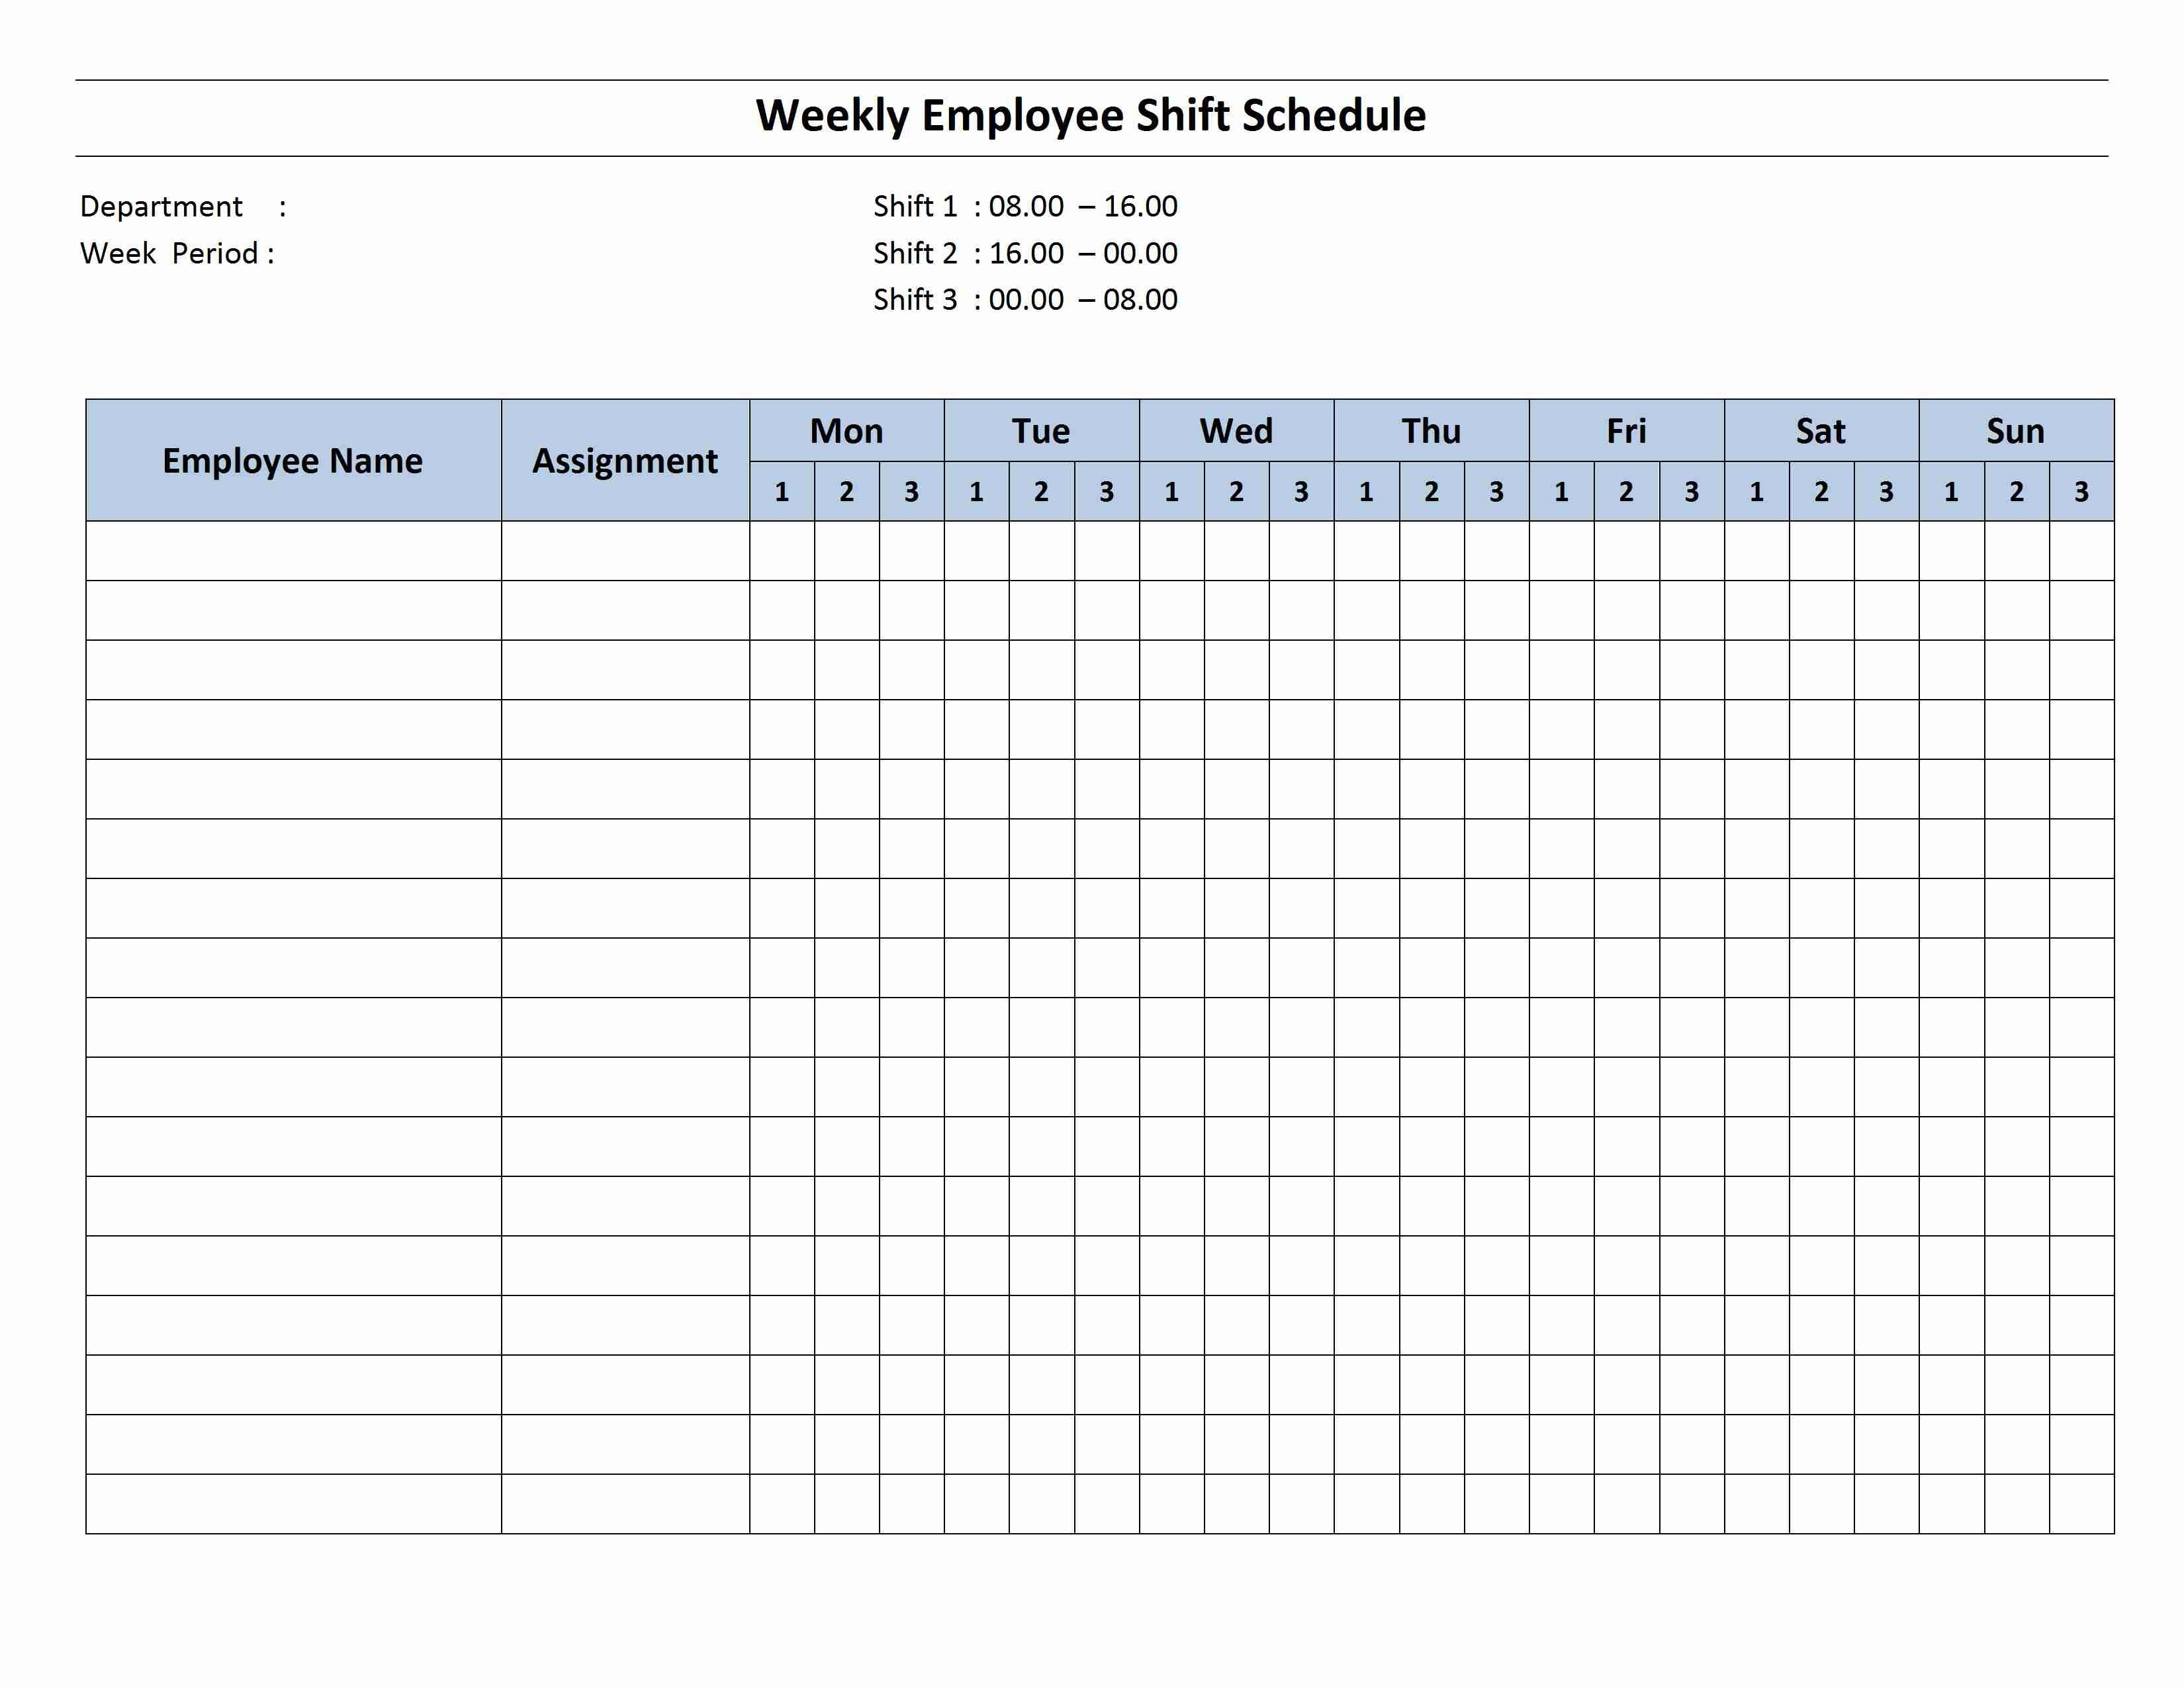 free printable templates for daily work schedules